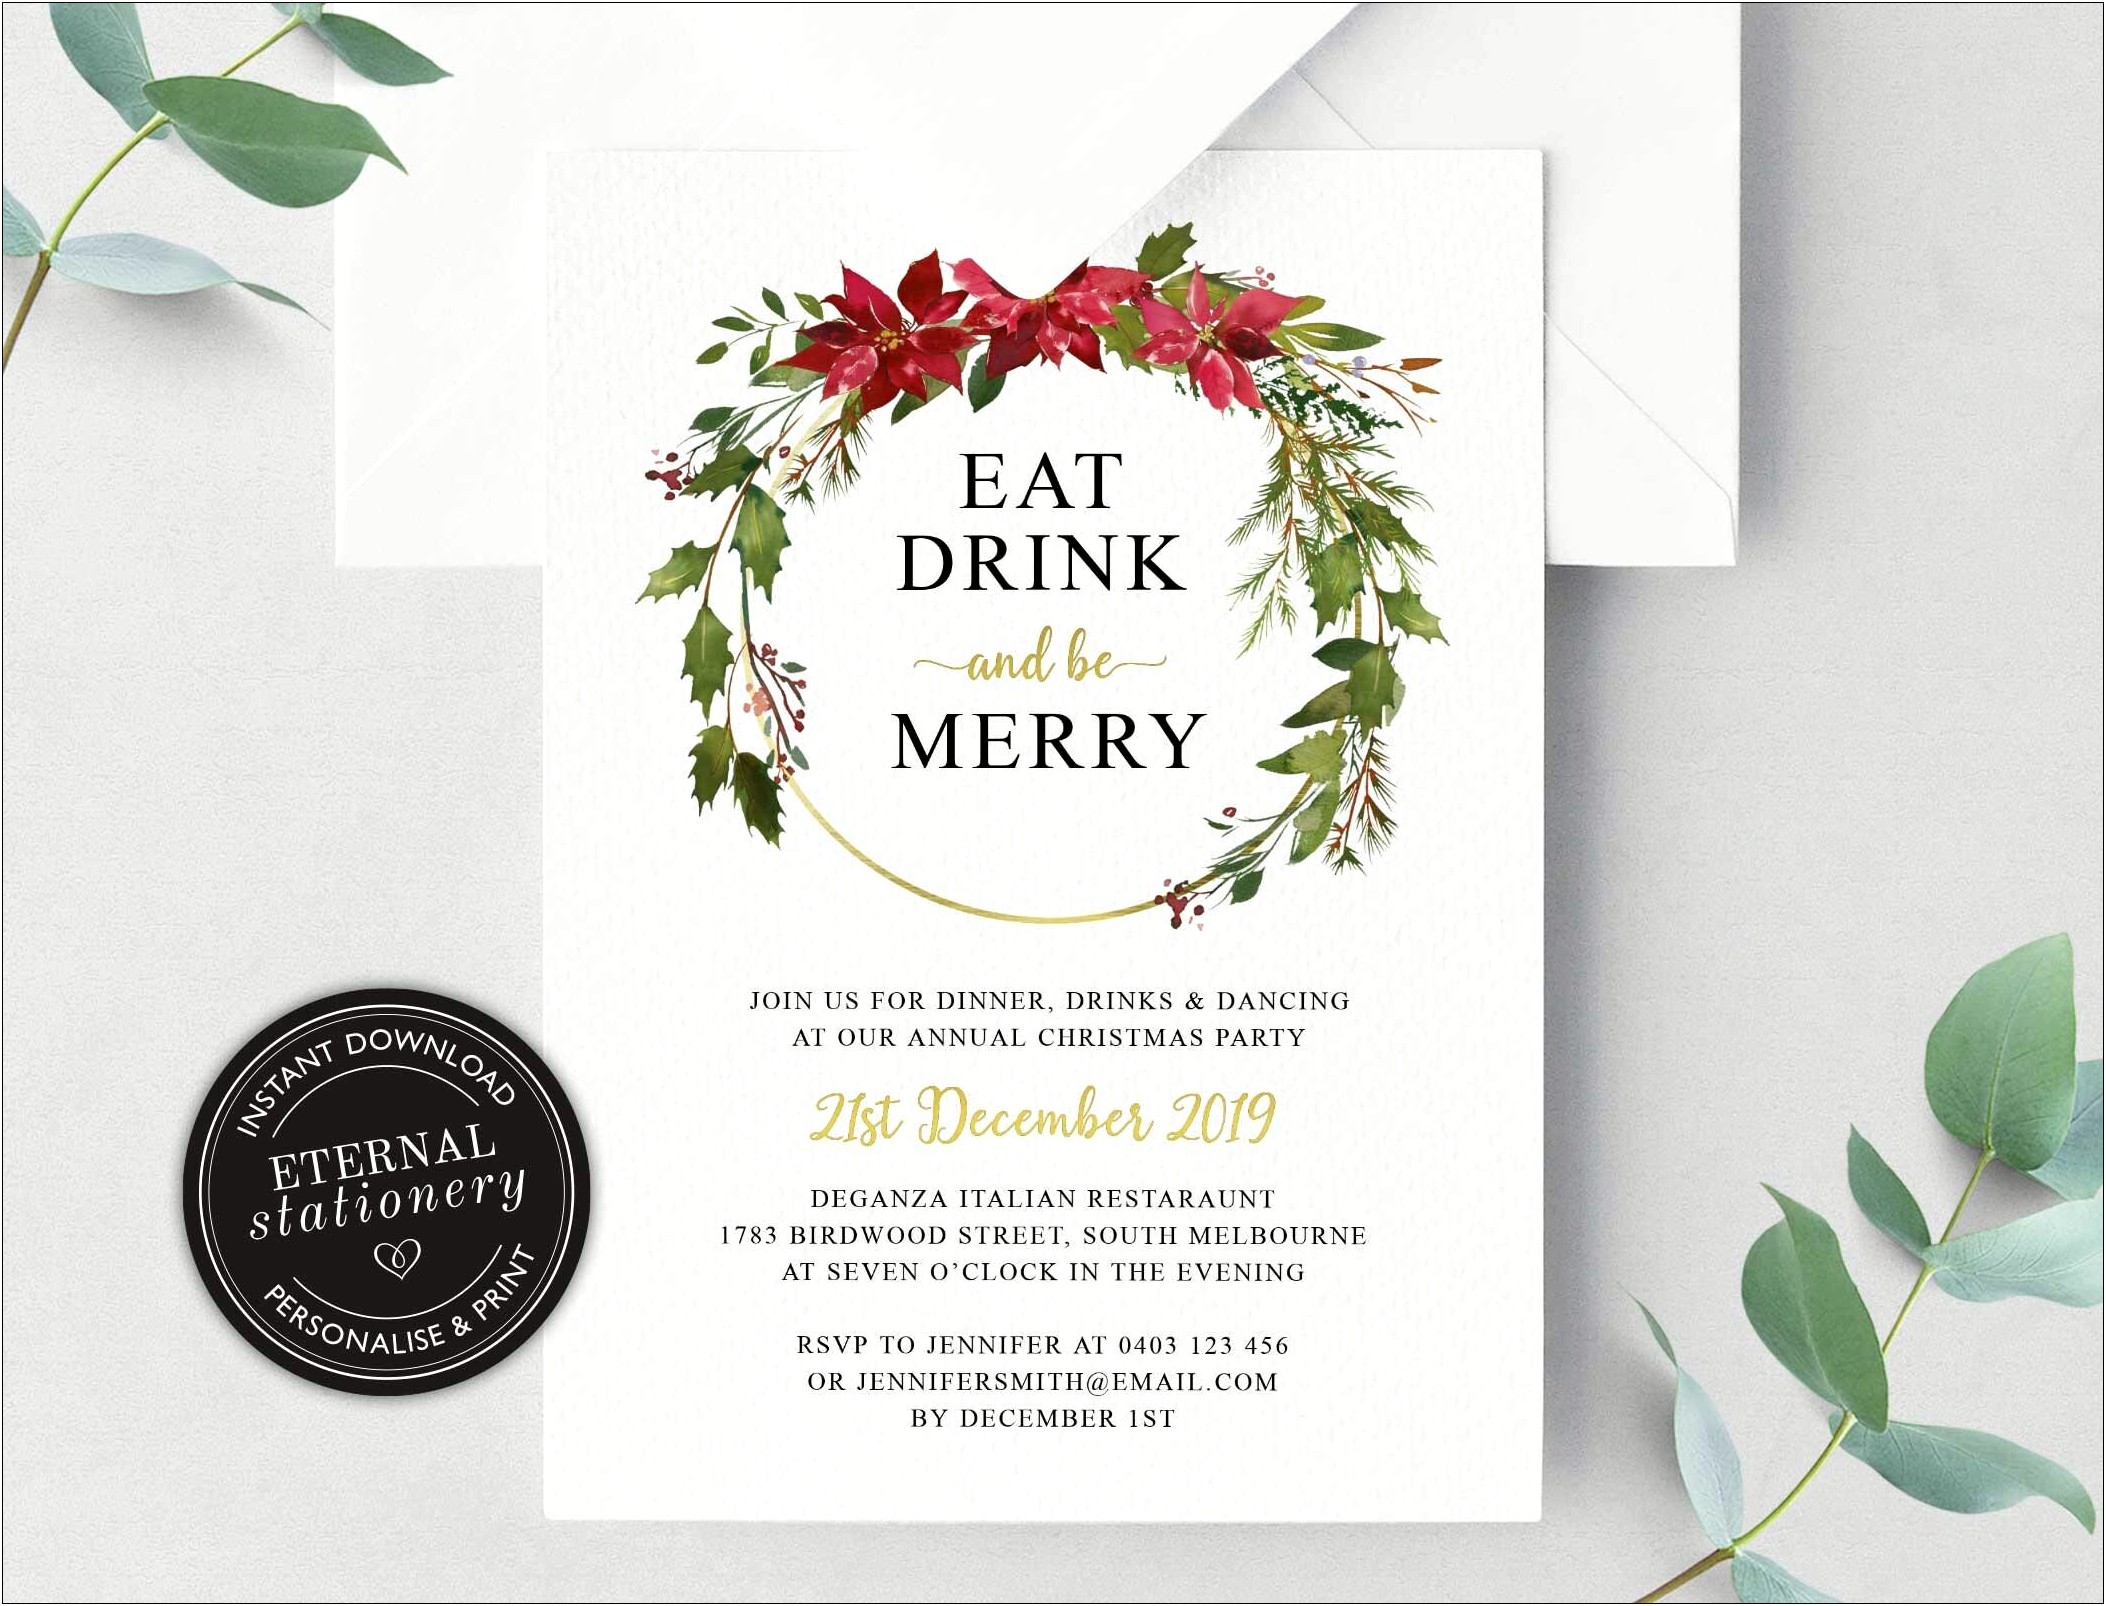 Eat Drink And Be Merry Wedding Invitations